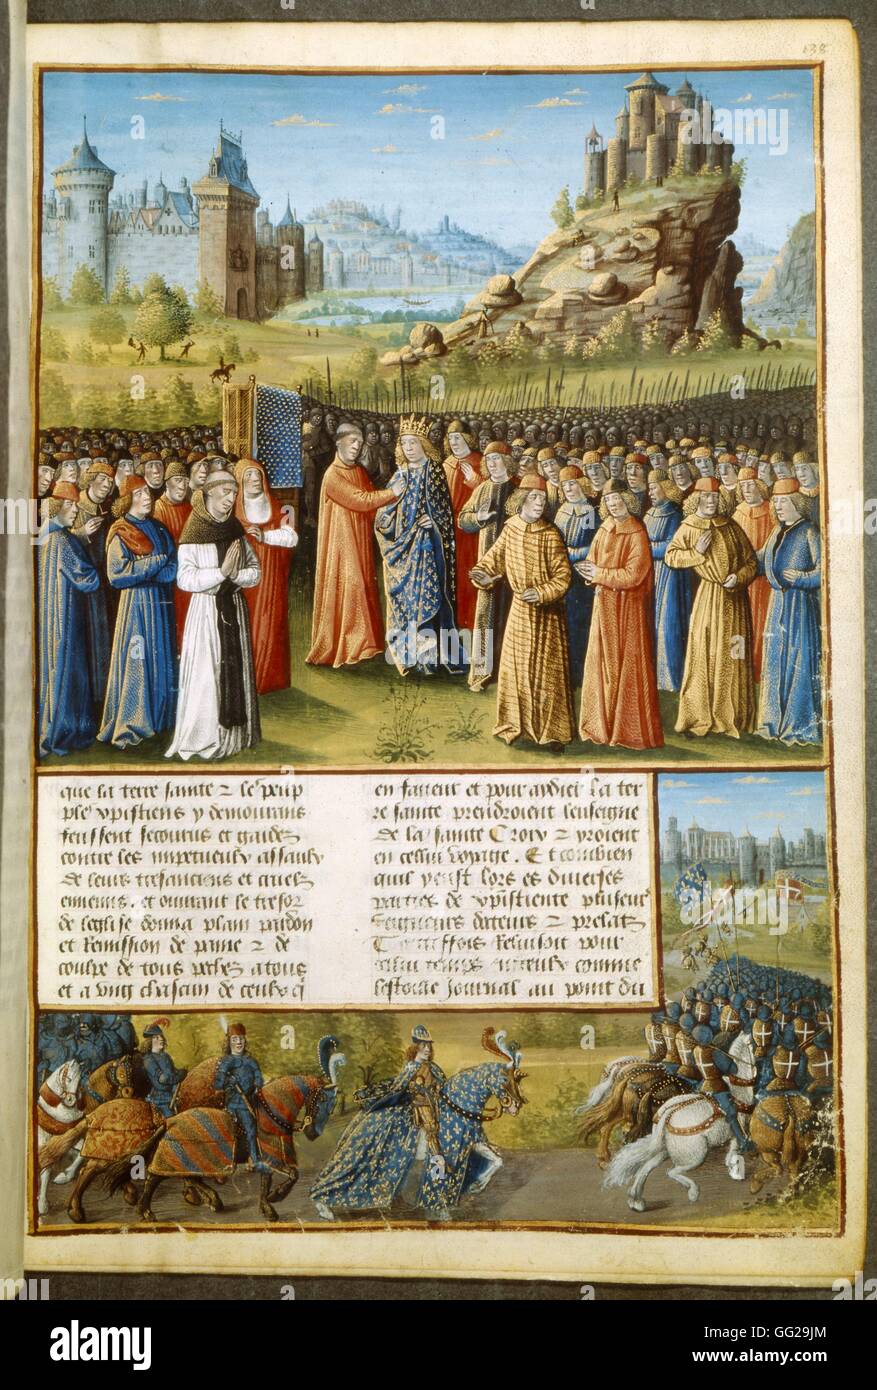 Overseas passages (1090-1153), St. Bernard preaching for the 2nd crusade (1147-1149) and Louis VII, king of France (St. Bernard founded the abbey of Clairvaux) 15th century France Stock Photo